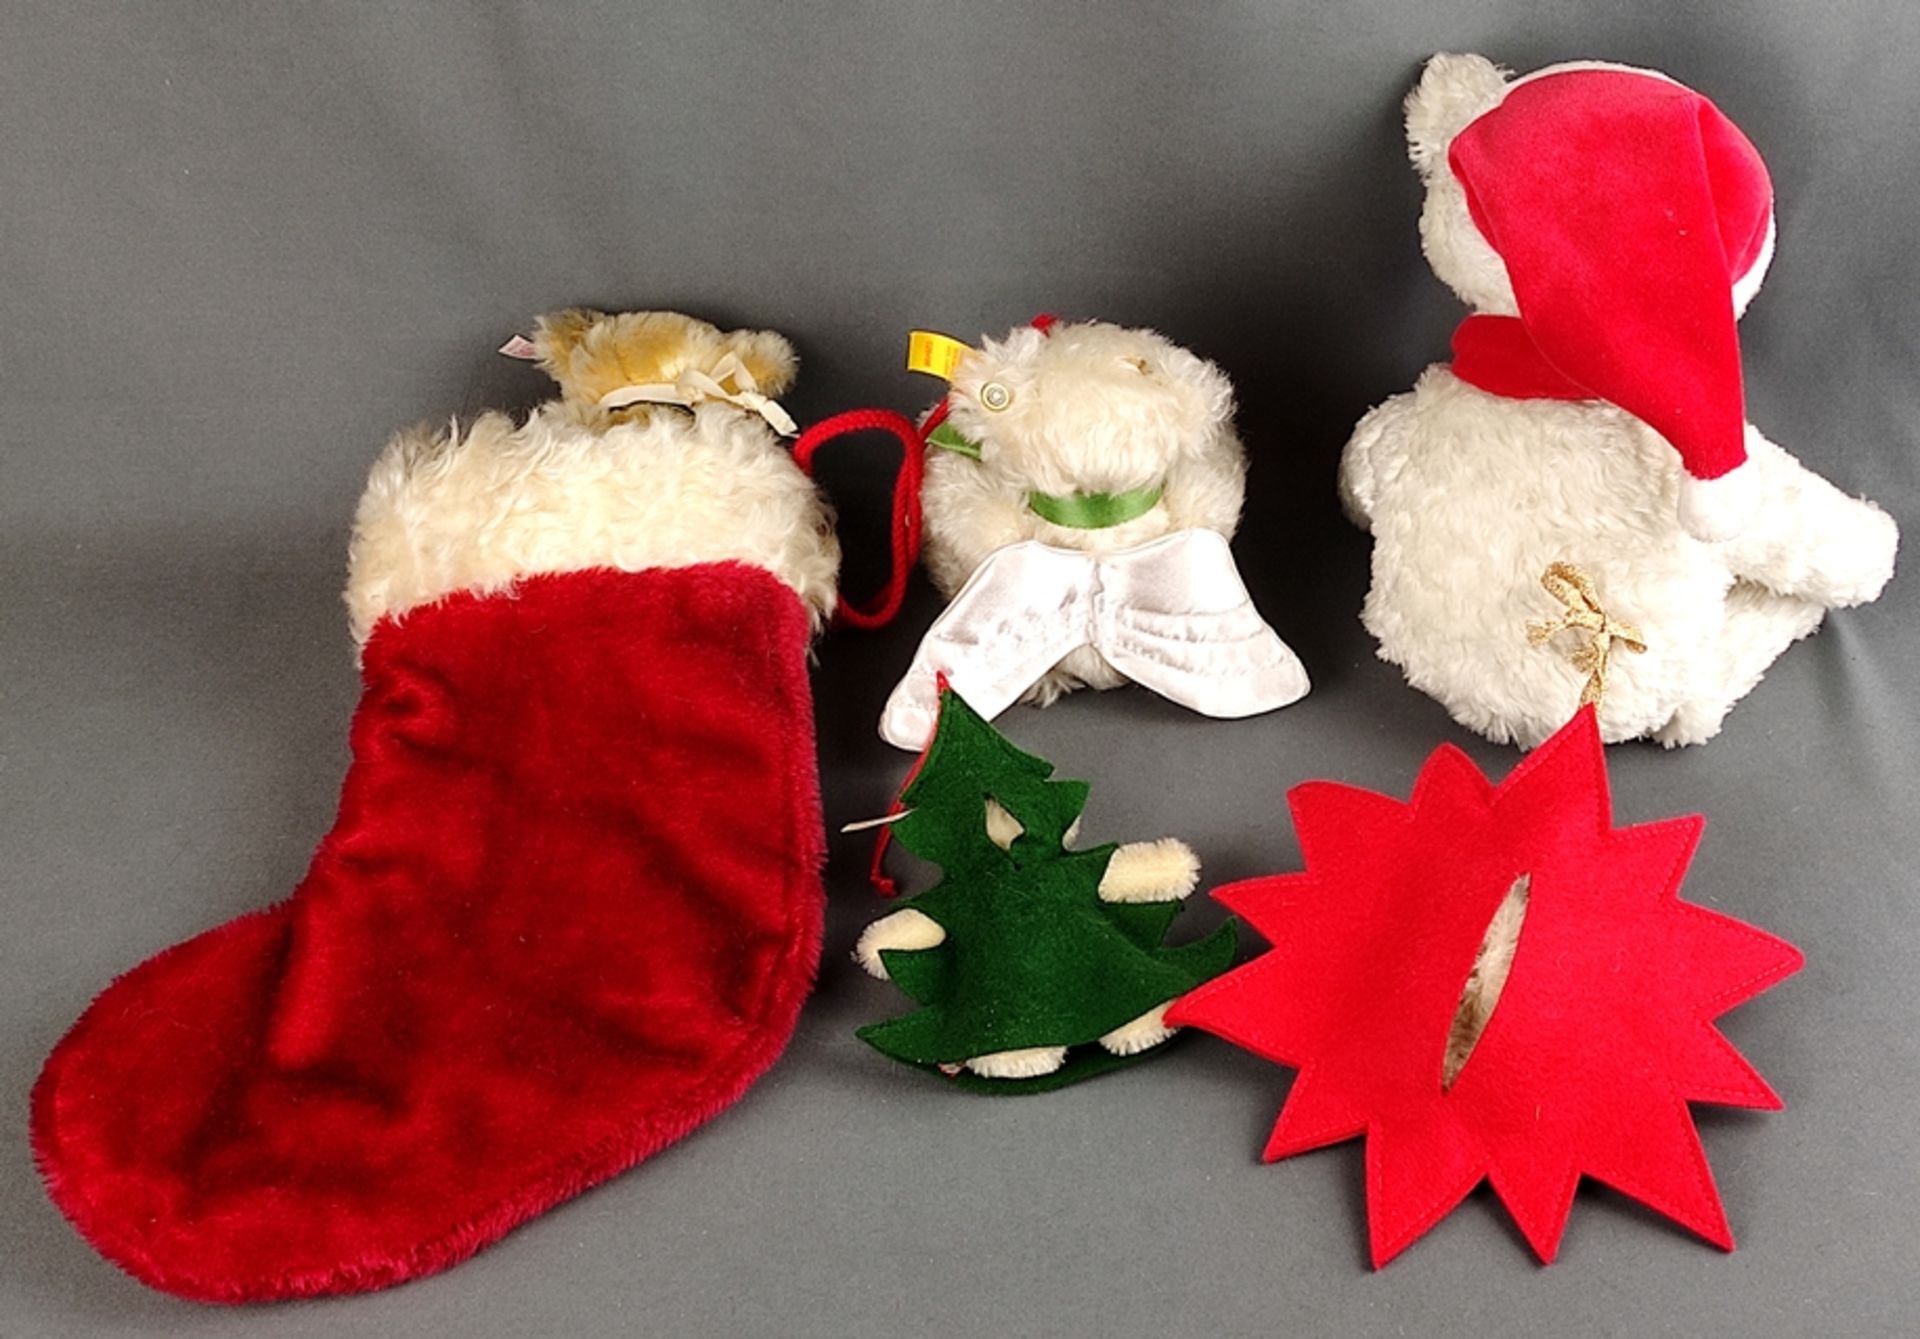 Steiff convolute "Christmas", 5 pieces, Teddy bear with Christmas stocking, limited edition of 5000 - Image 2 of 3